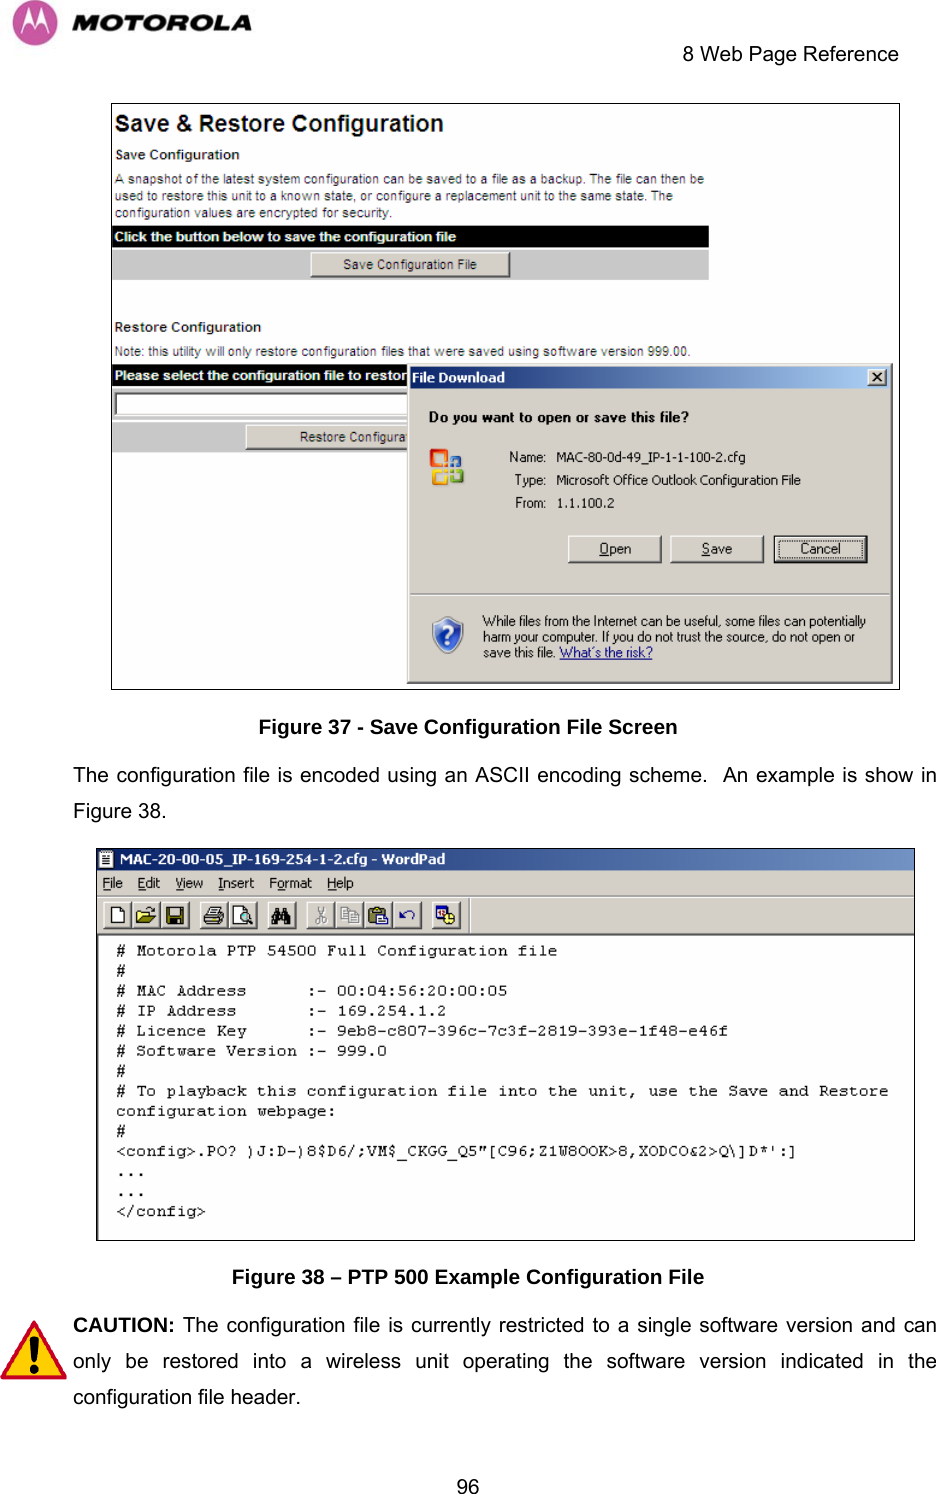     8 Web Page Reference  96 Figure 37 - Save Configuration File Screen The configuration file is encoded using an ASCII encoding scheme.  An example is show in Figure 38.  Figure 38 – PTP 500 Example Configuration File CAUTION: The configuration file is currently restricted to a single software version and can only be restored into a wireless unit operating the software version indicated in the configuration file header. 